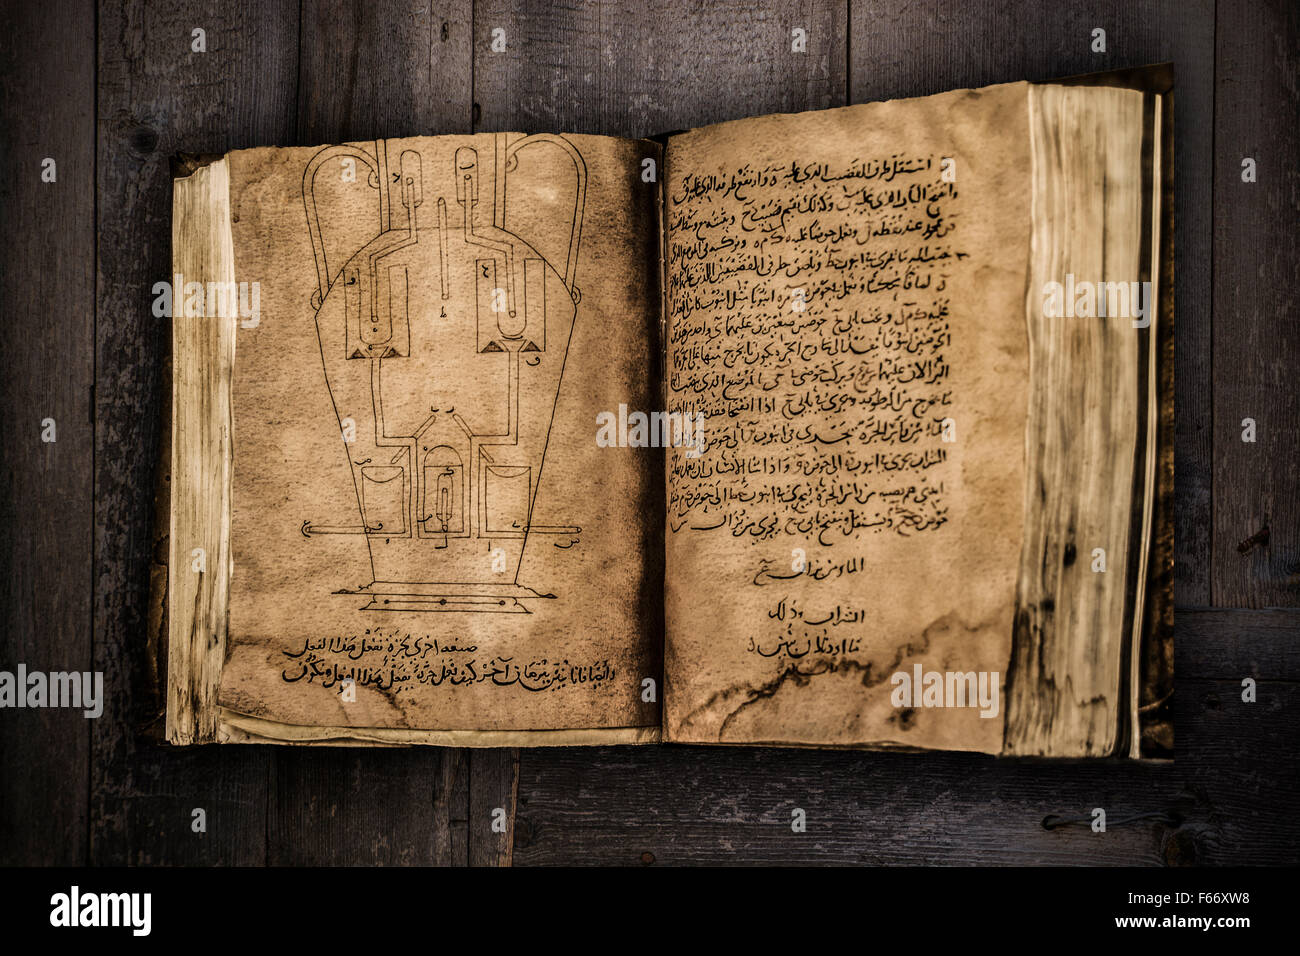 The old, wise book lies on a wooden background Stock Photo